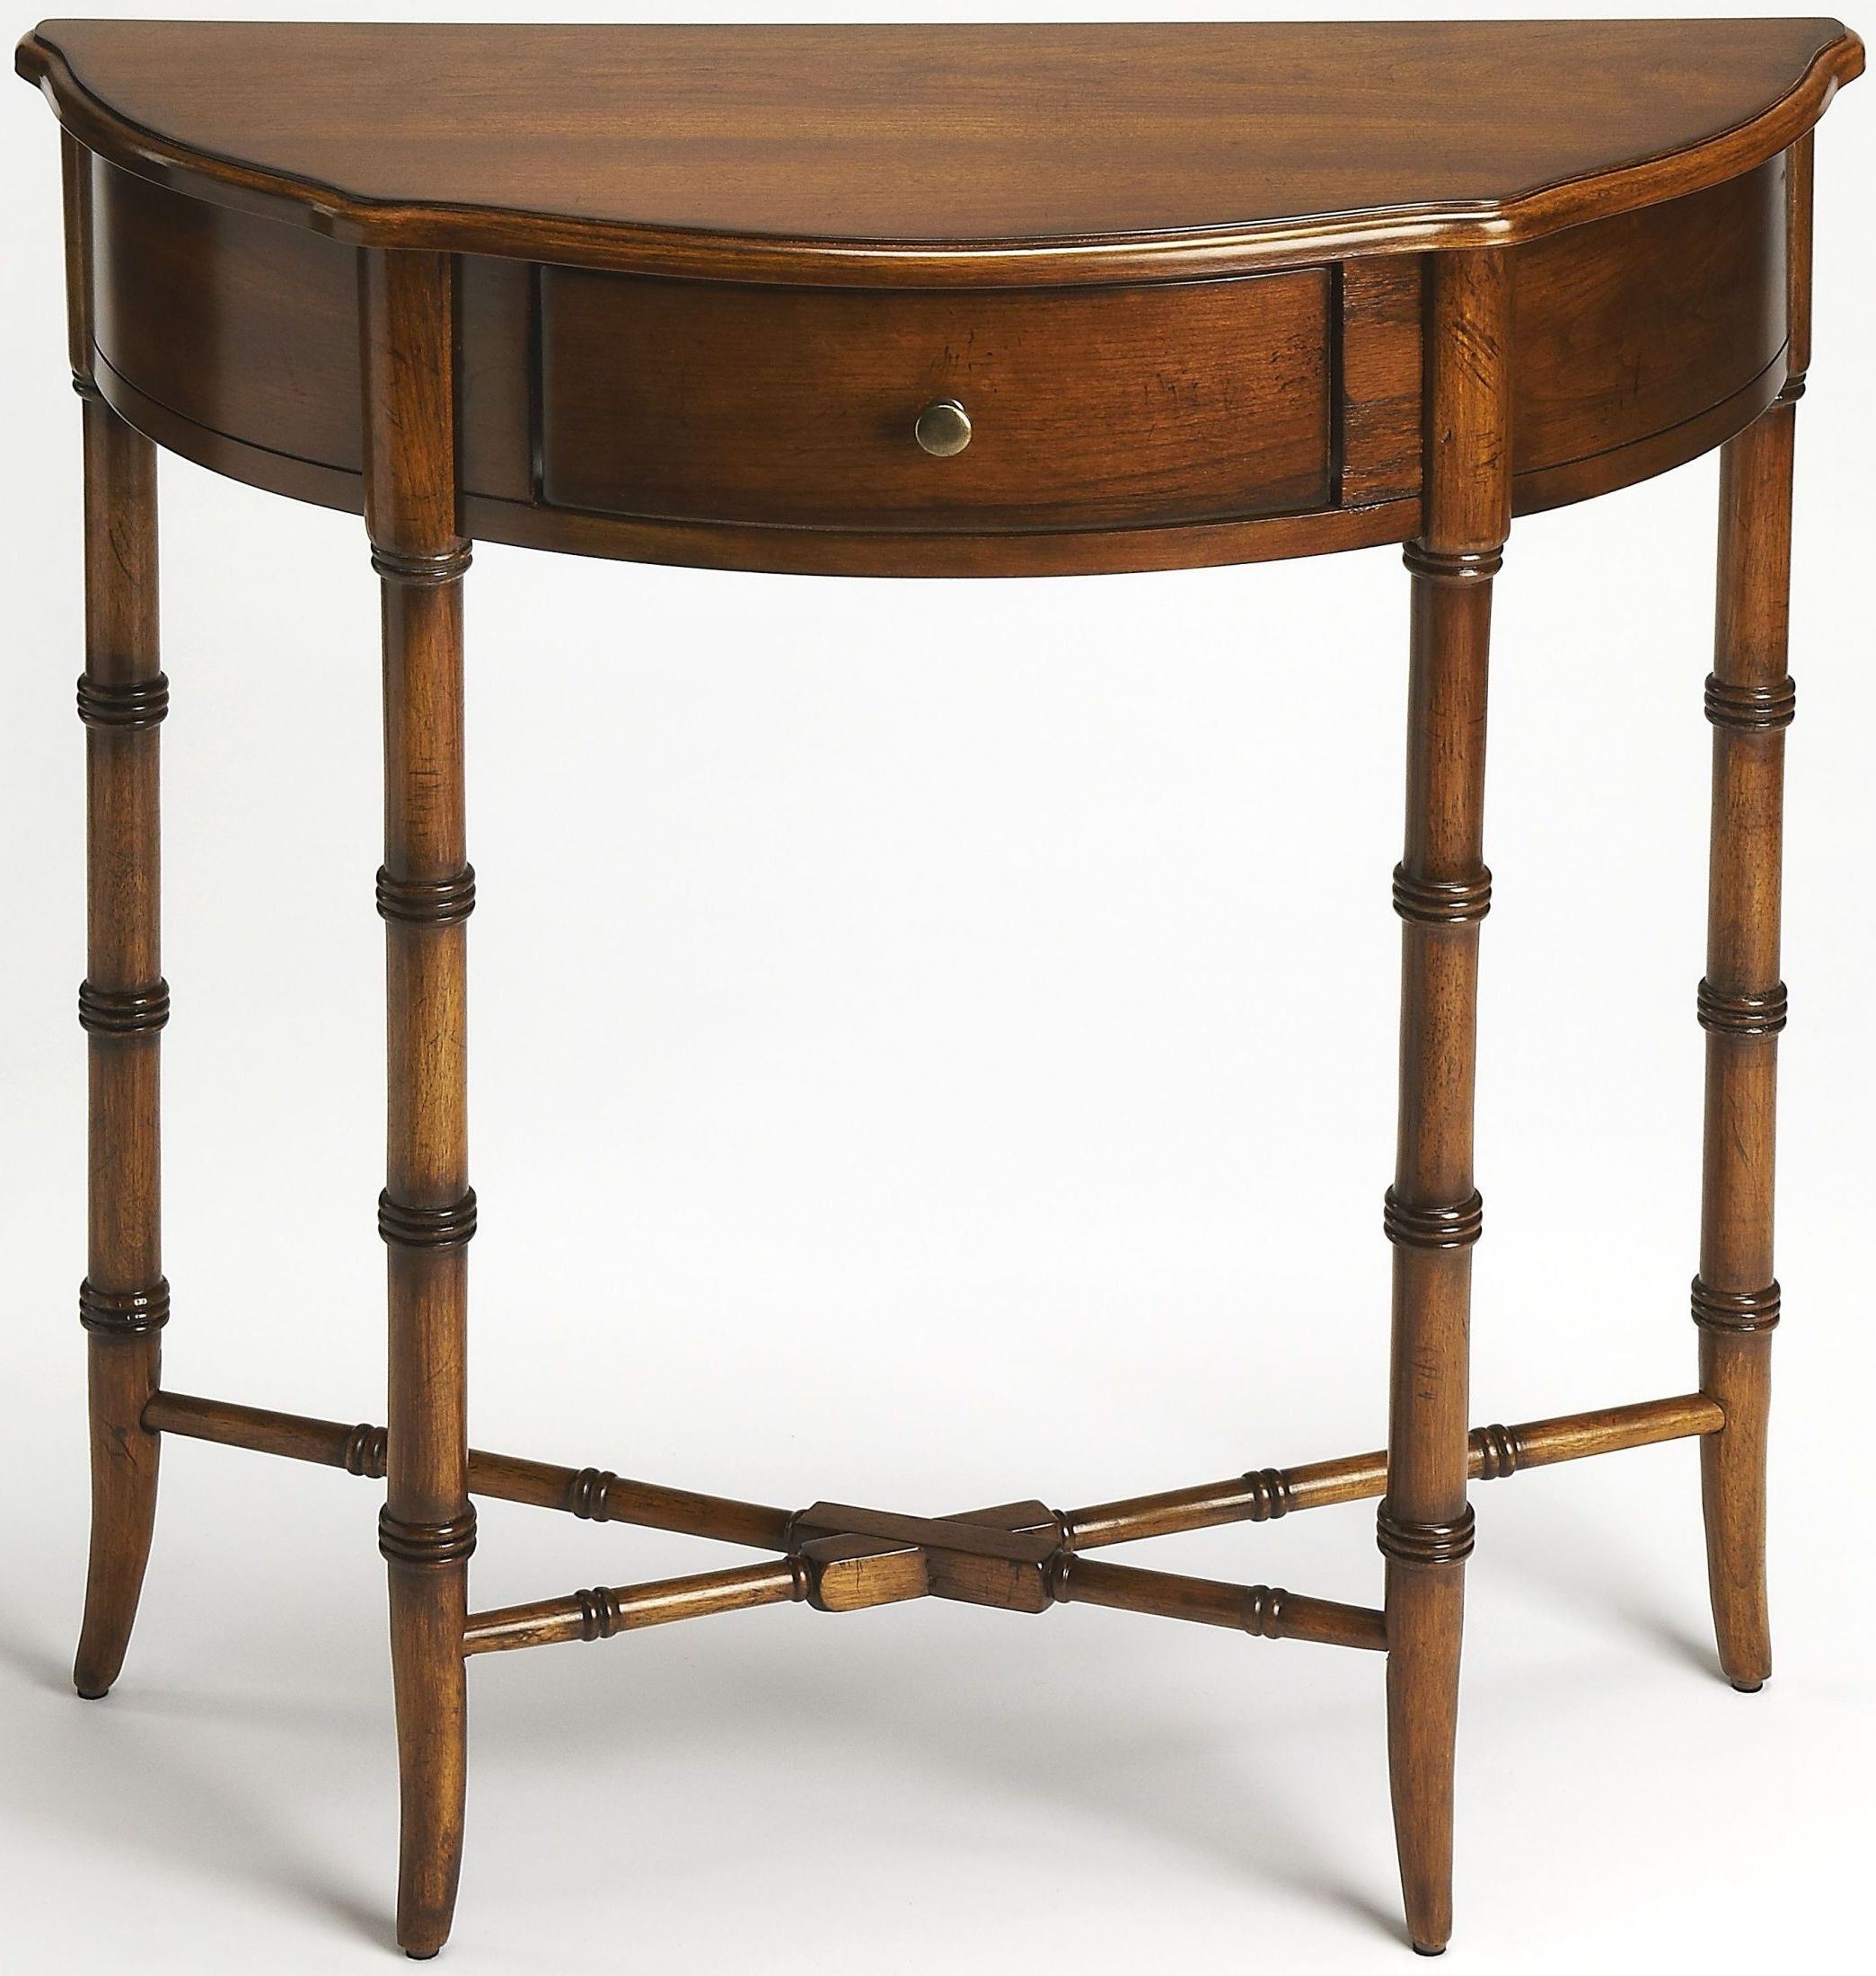 Antique Console Tables In Fashionable Skilling Antique Cherry Demilune Console Table From Butler (View 1 of 10)